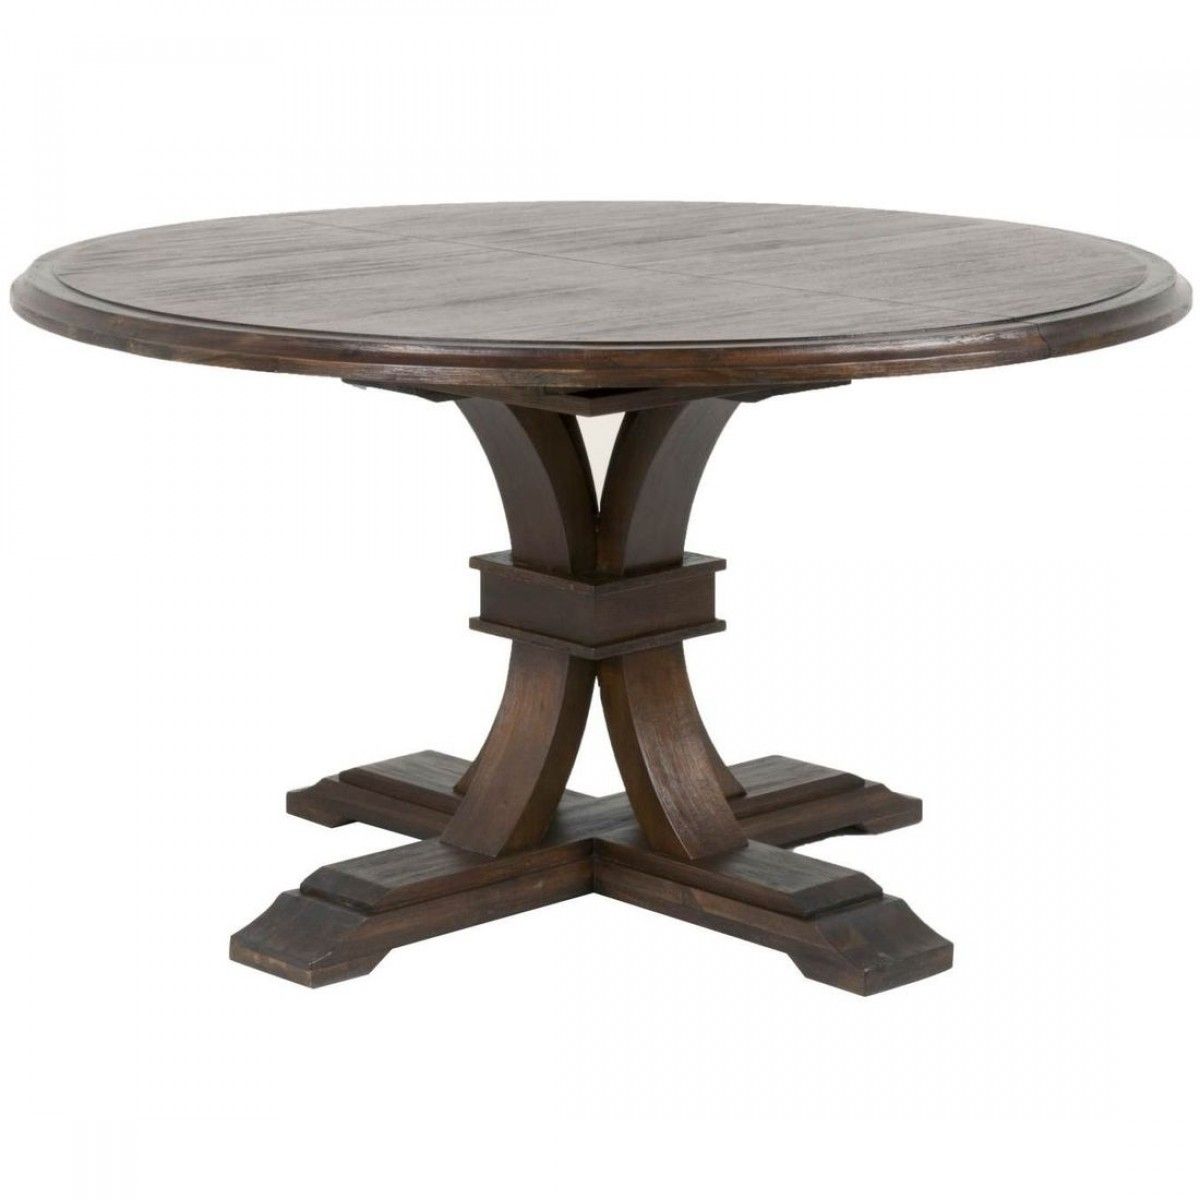 Orient Express Traditions Devon Round Extension Dining Table For Throughout 2017 Jaxon Grey Round Extension Dining Tables (View 10 of 20)